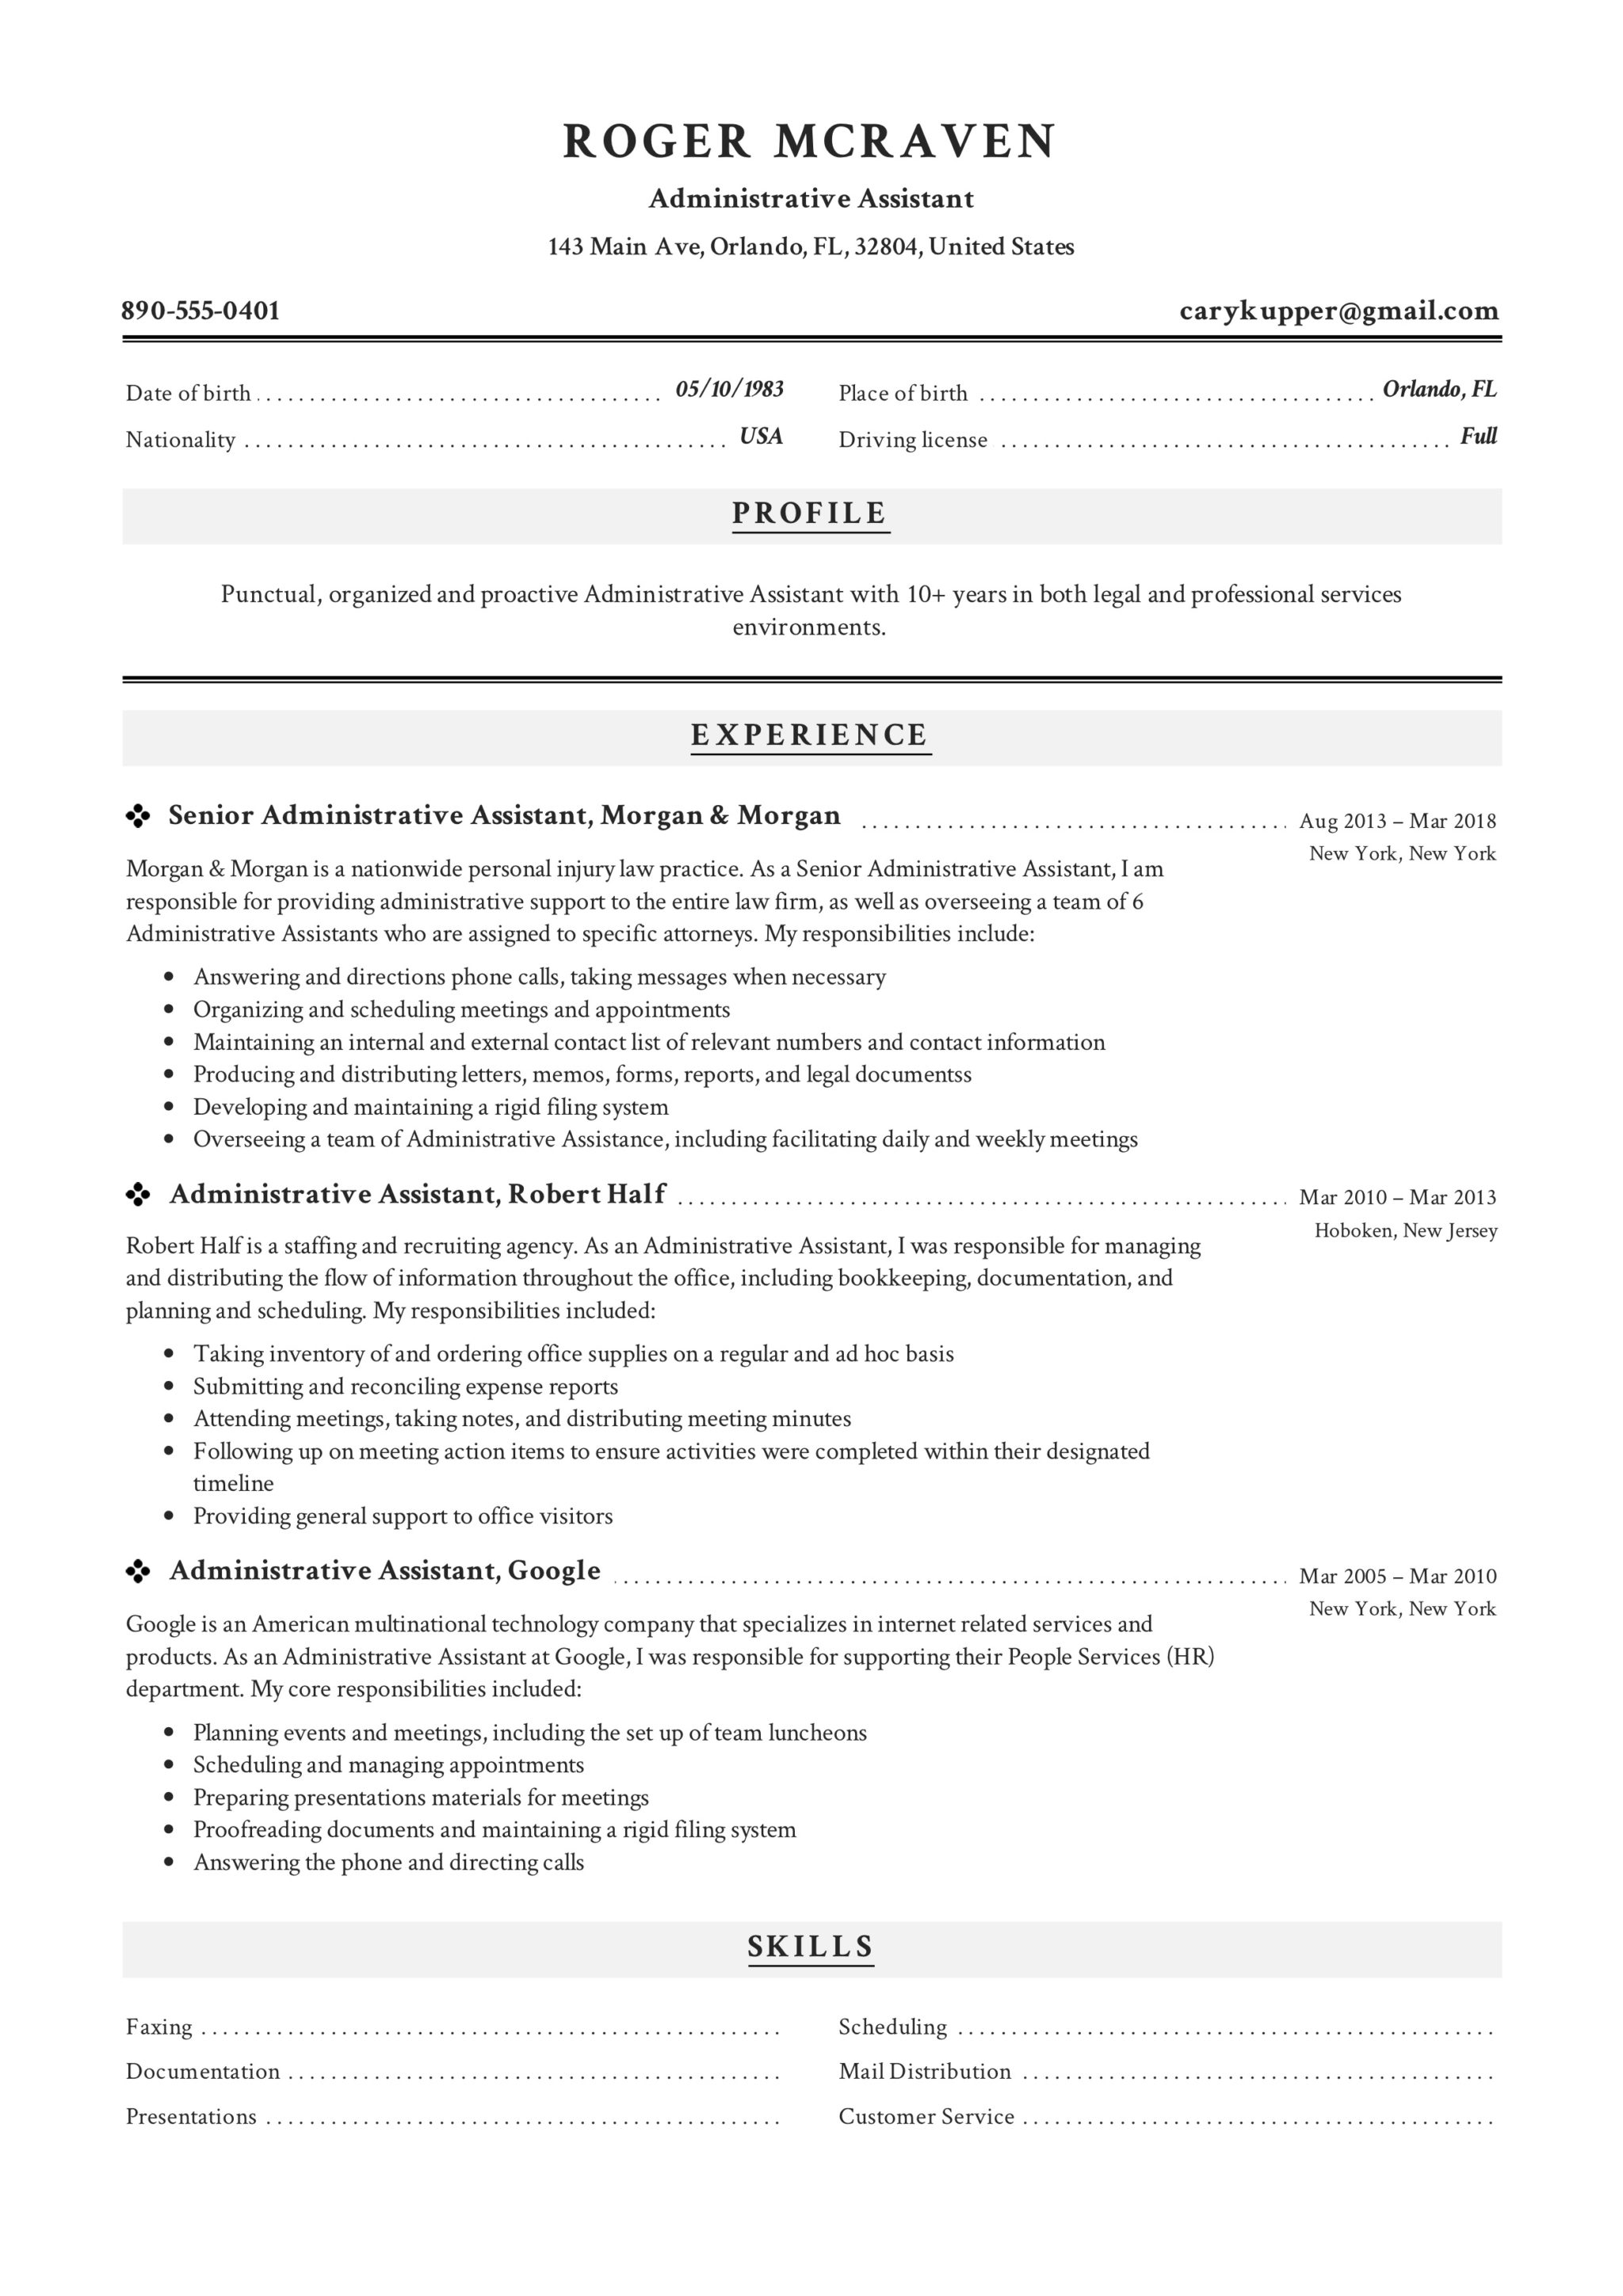 Professional Administrative Assistant Resume Example